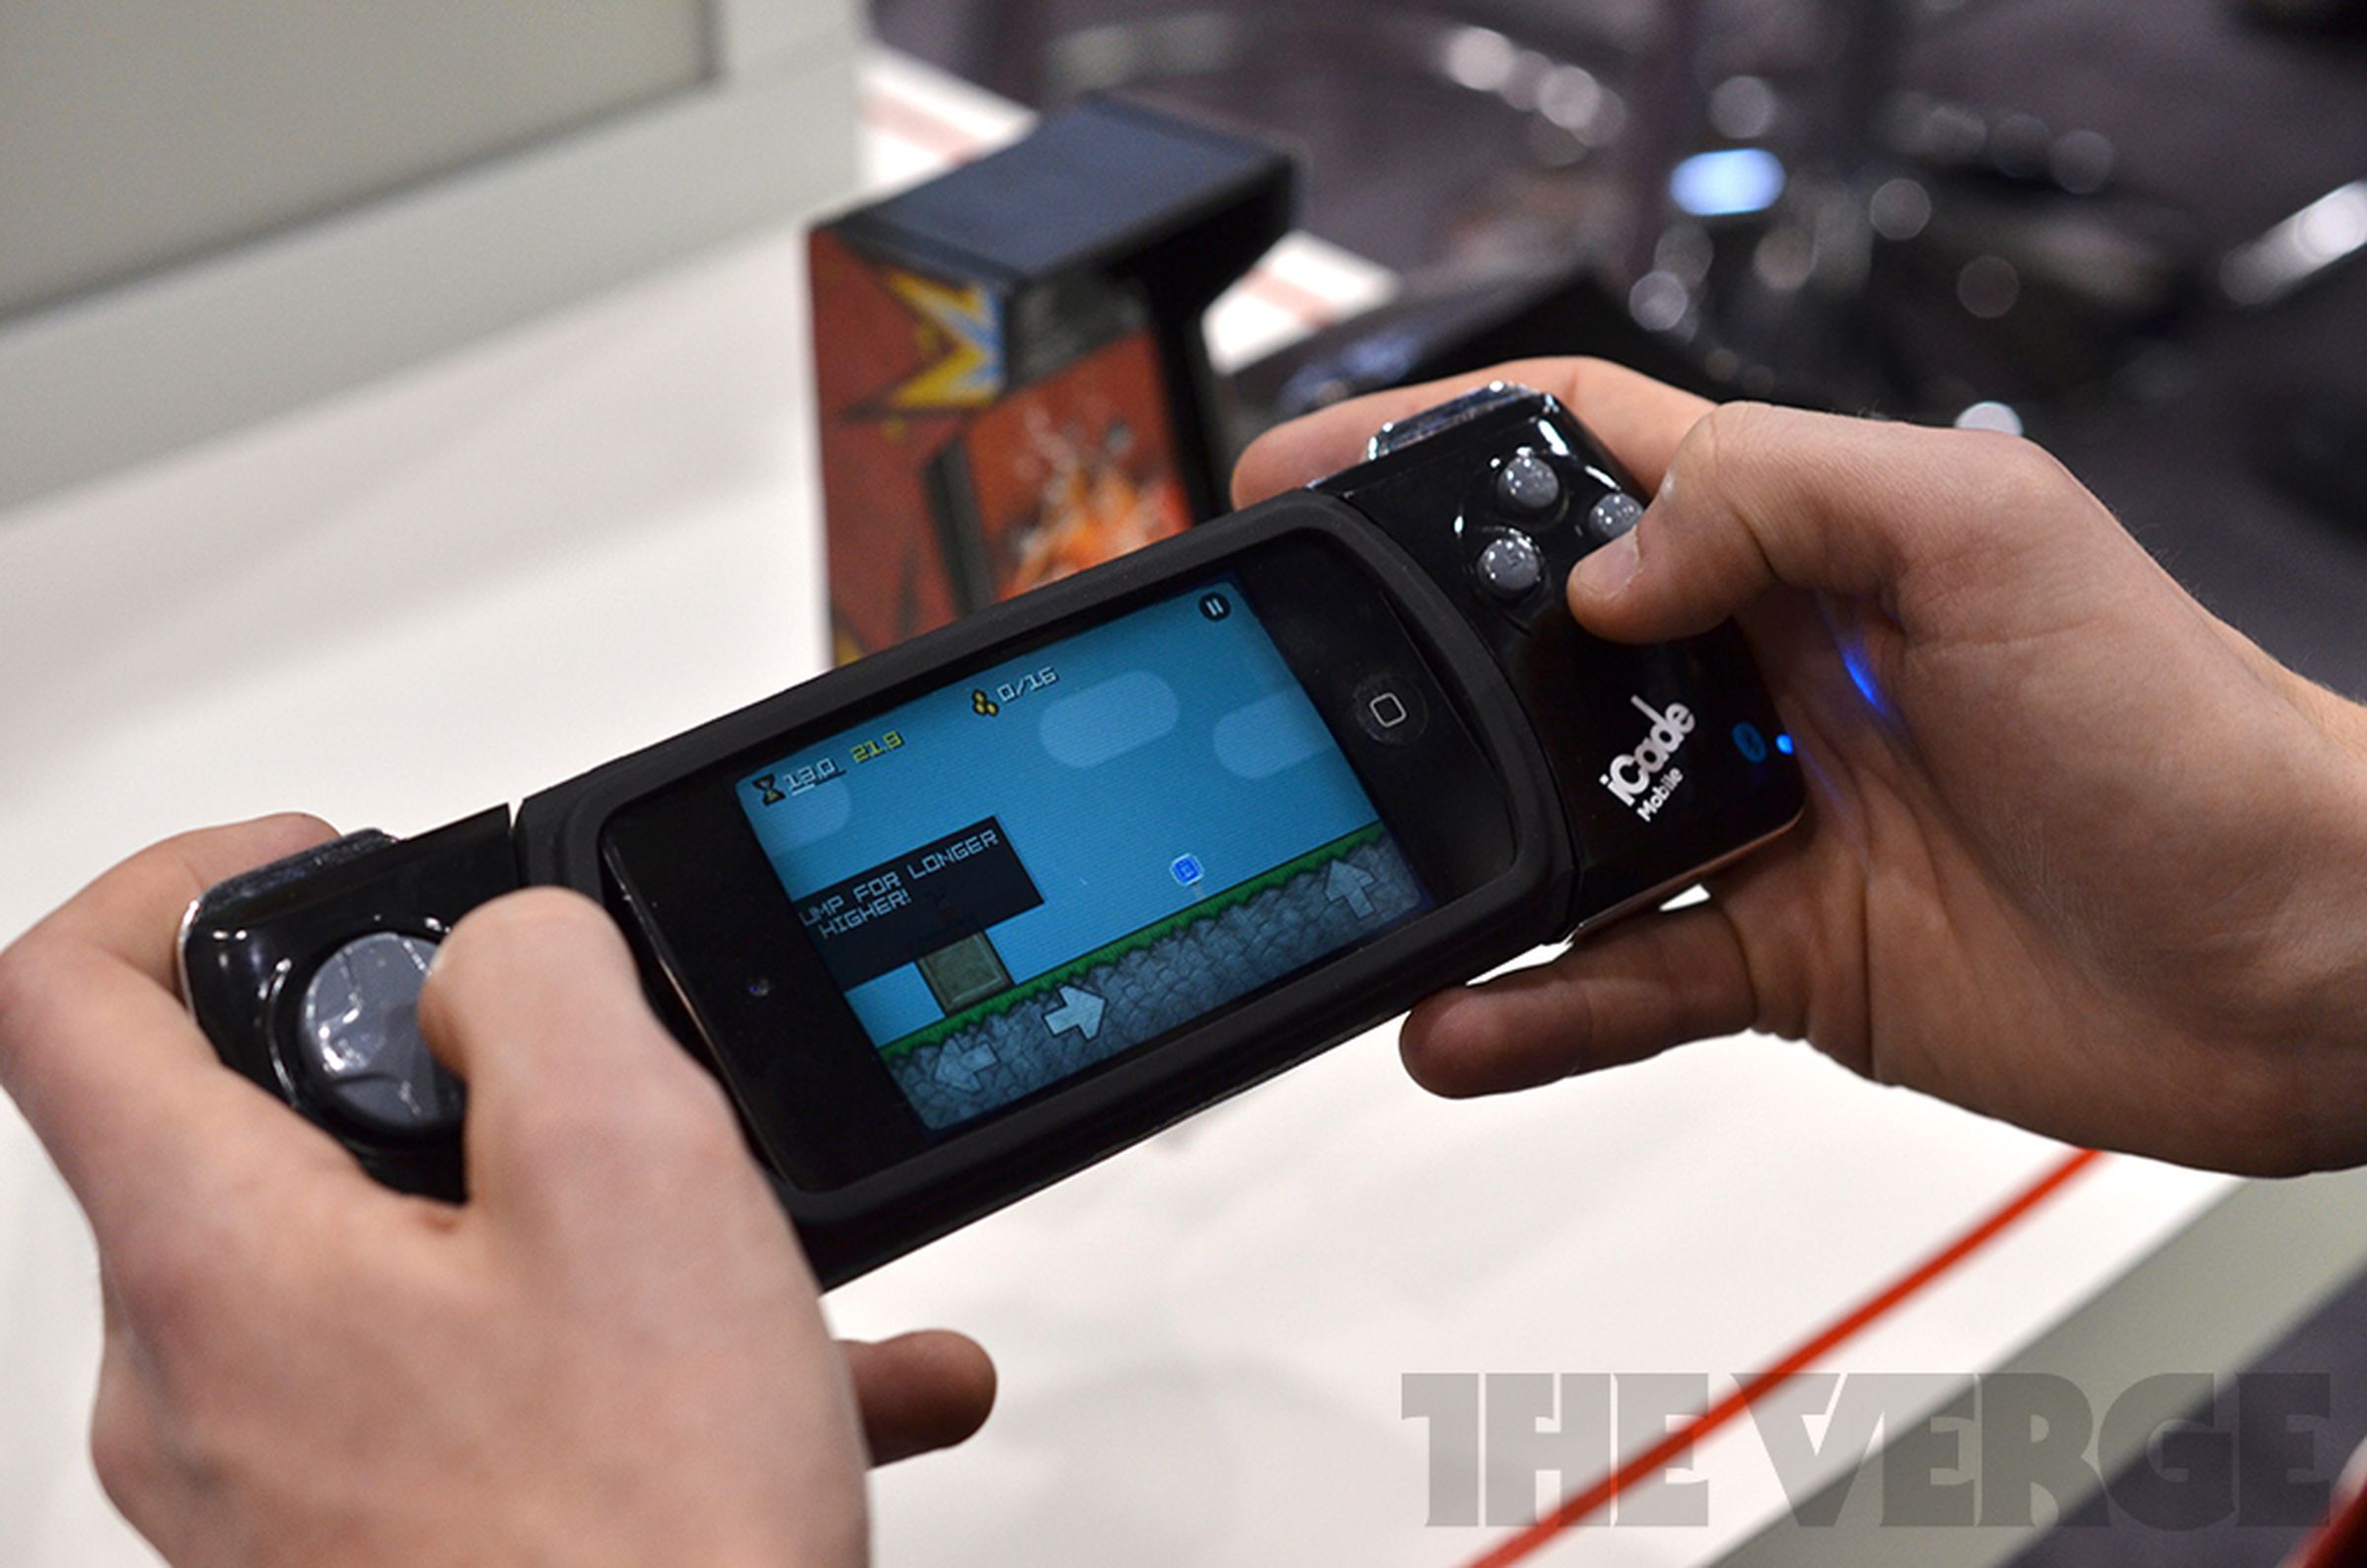 Ion iCade Mobile, iCade Jr., and iCade Core hands-on photos